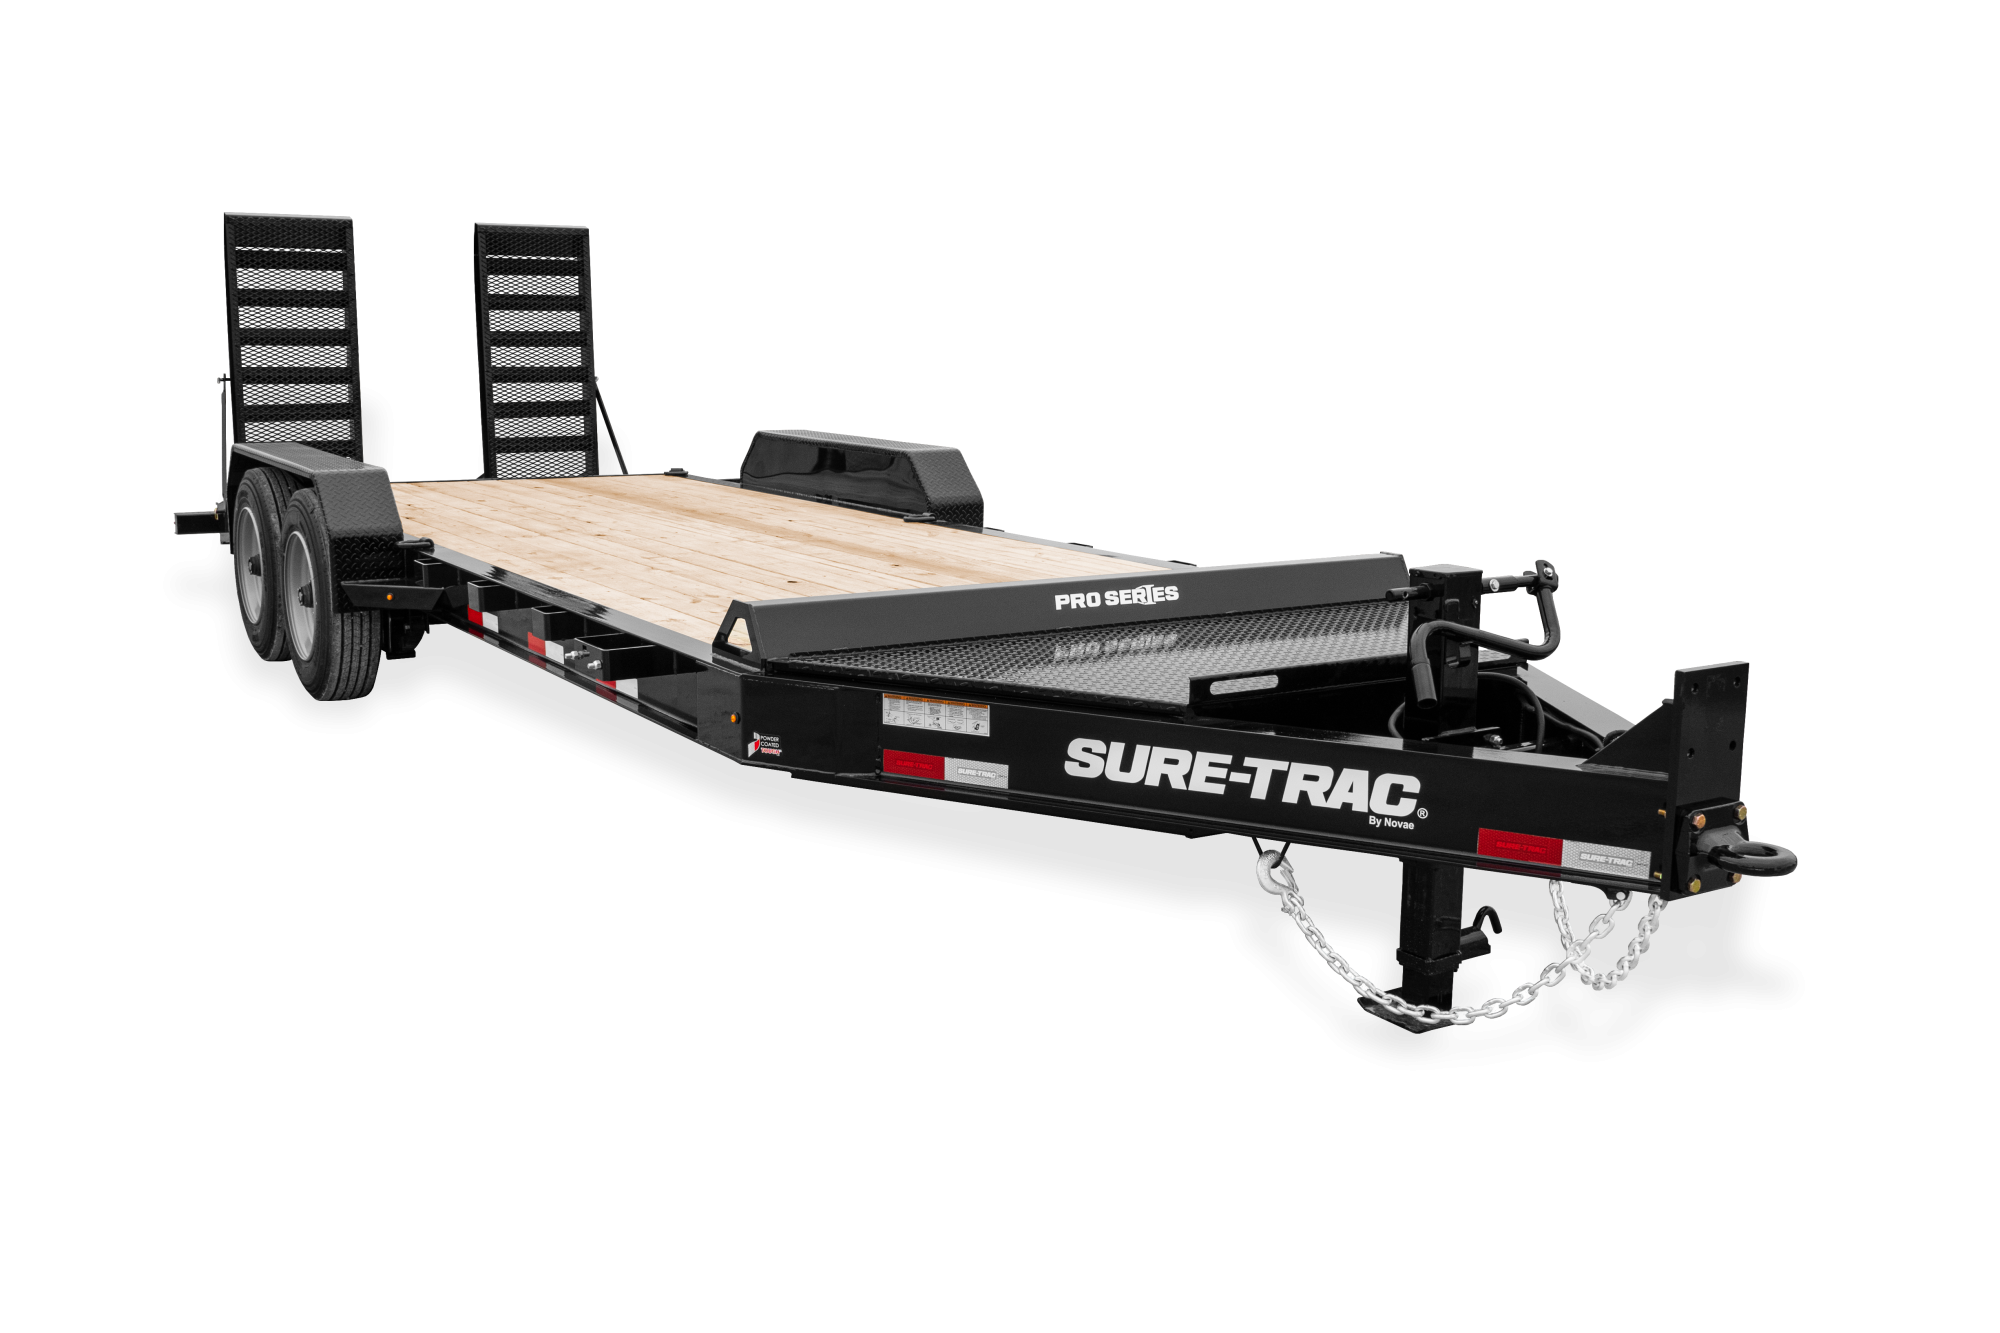 Sure-Trac | Pro Series Equipment | Image | Front view, tilted, Pro Series Equipment with reflective tape